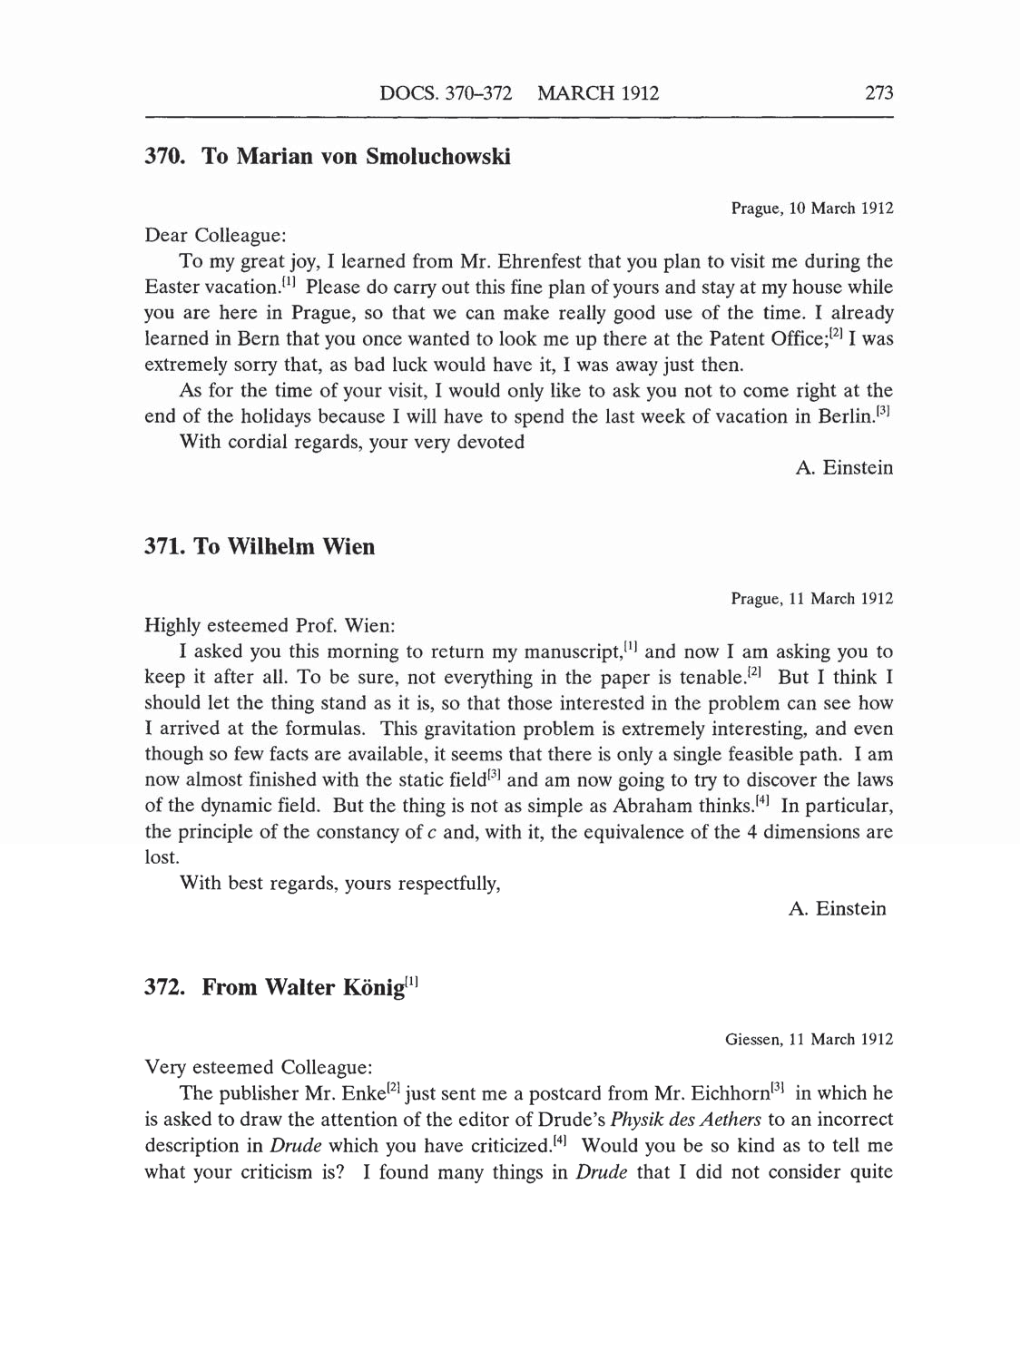 Volume 5: The Swiss Years: Correspondence, 1902-1914 (English translation supplement) page 273